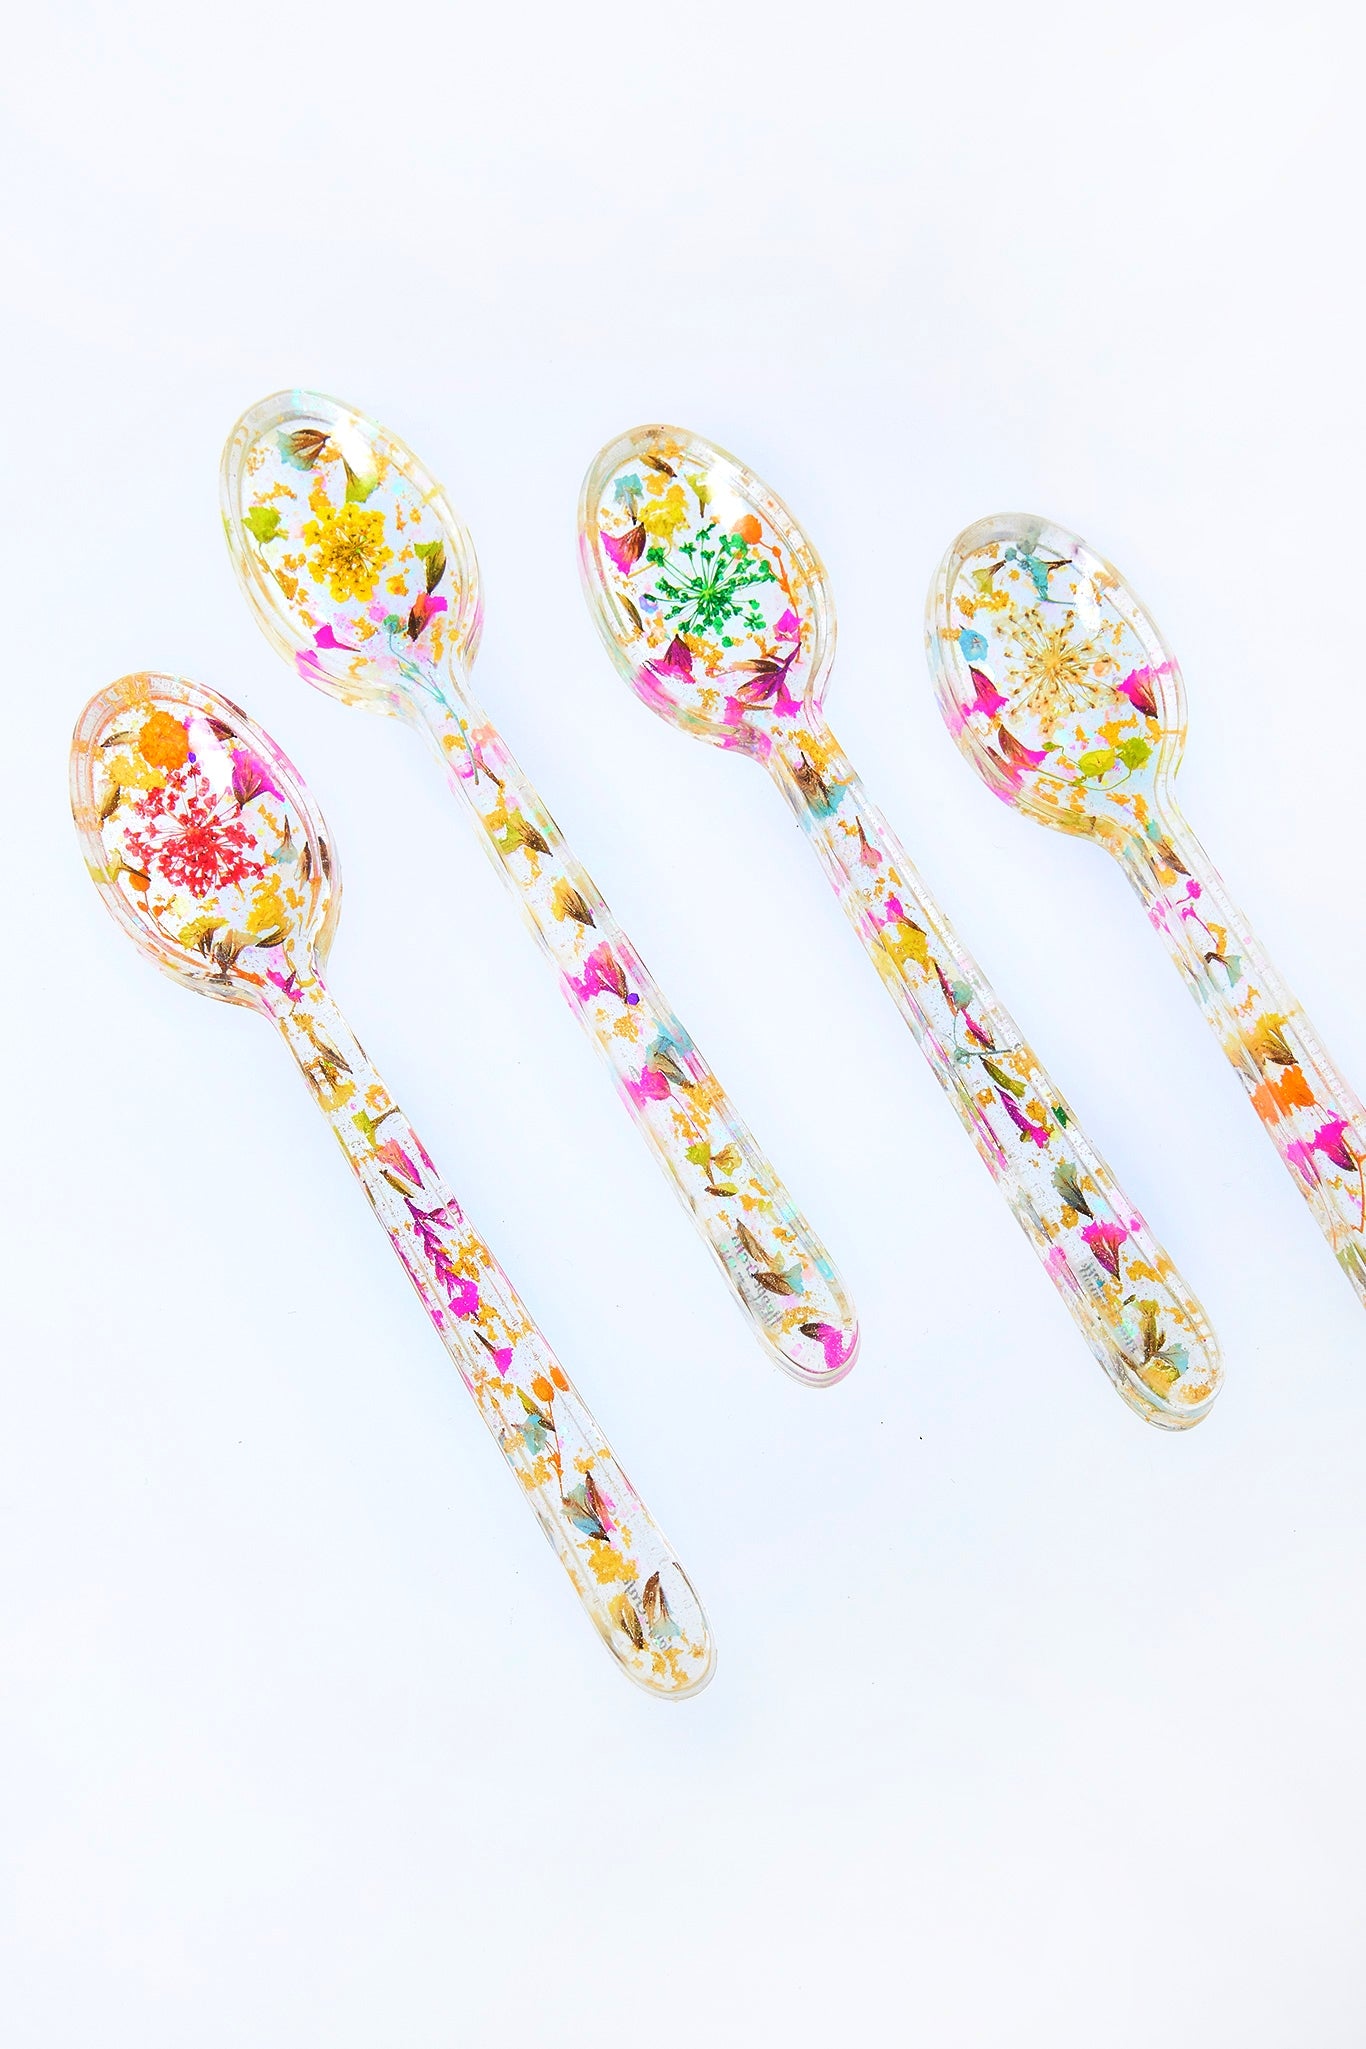 You Only Live Once - Lick the Spoon Spatula Crown Florals